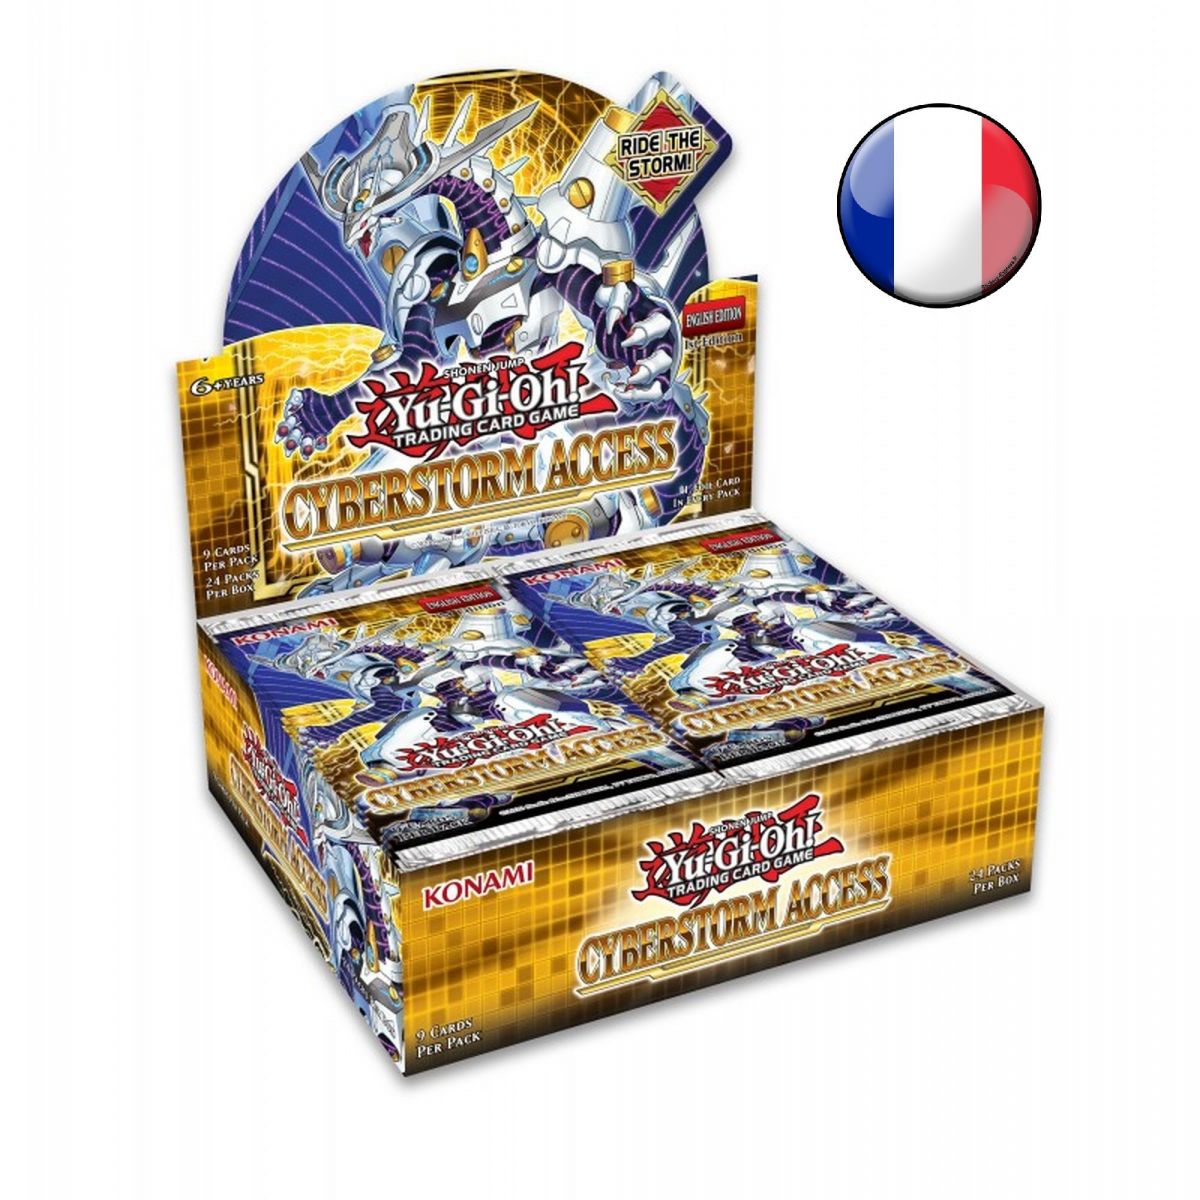 Item Yu Gi Oh! - Display - Box of 24 Boosters - Access to the Cyber-Storm - FR